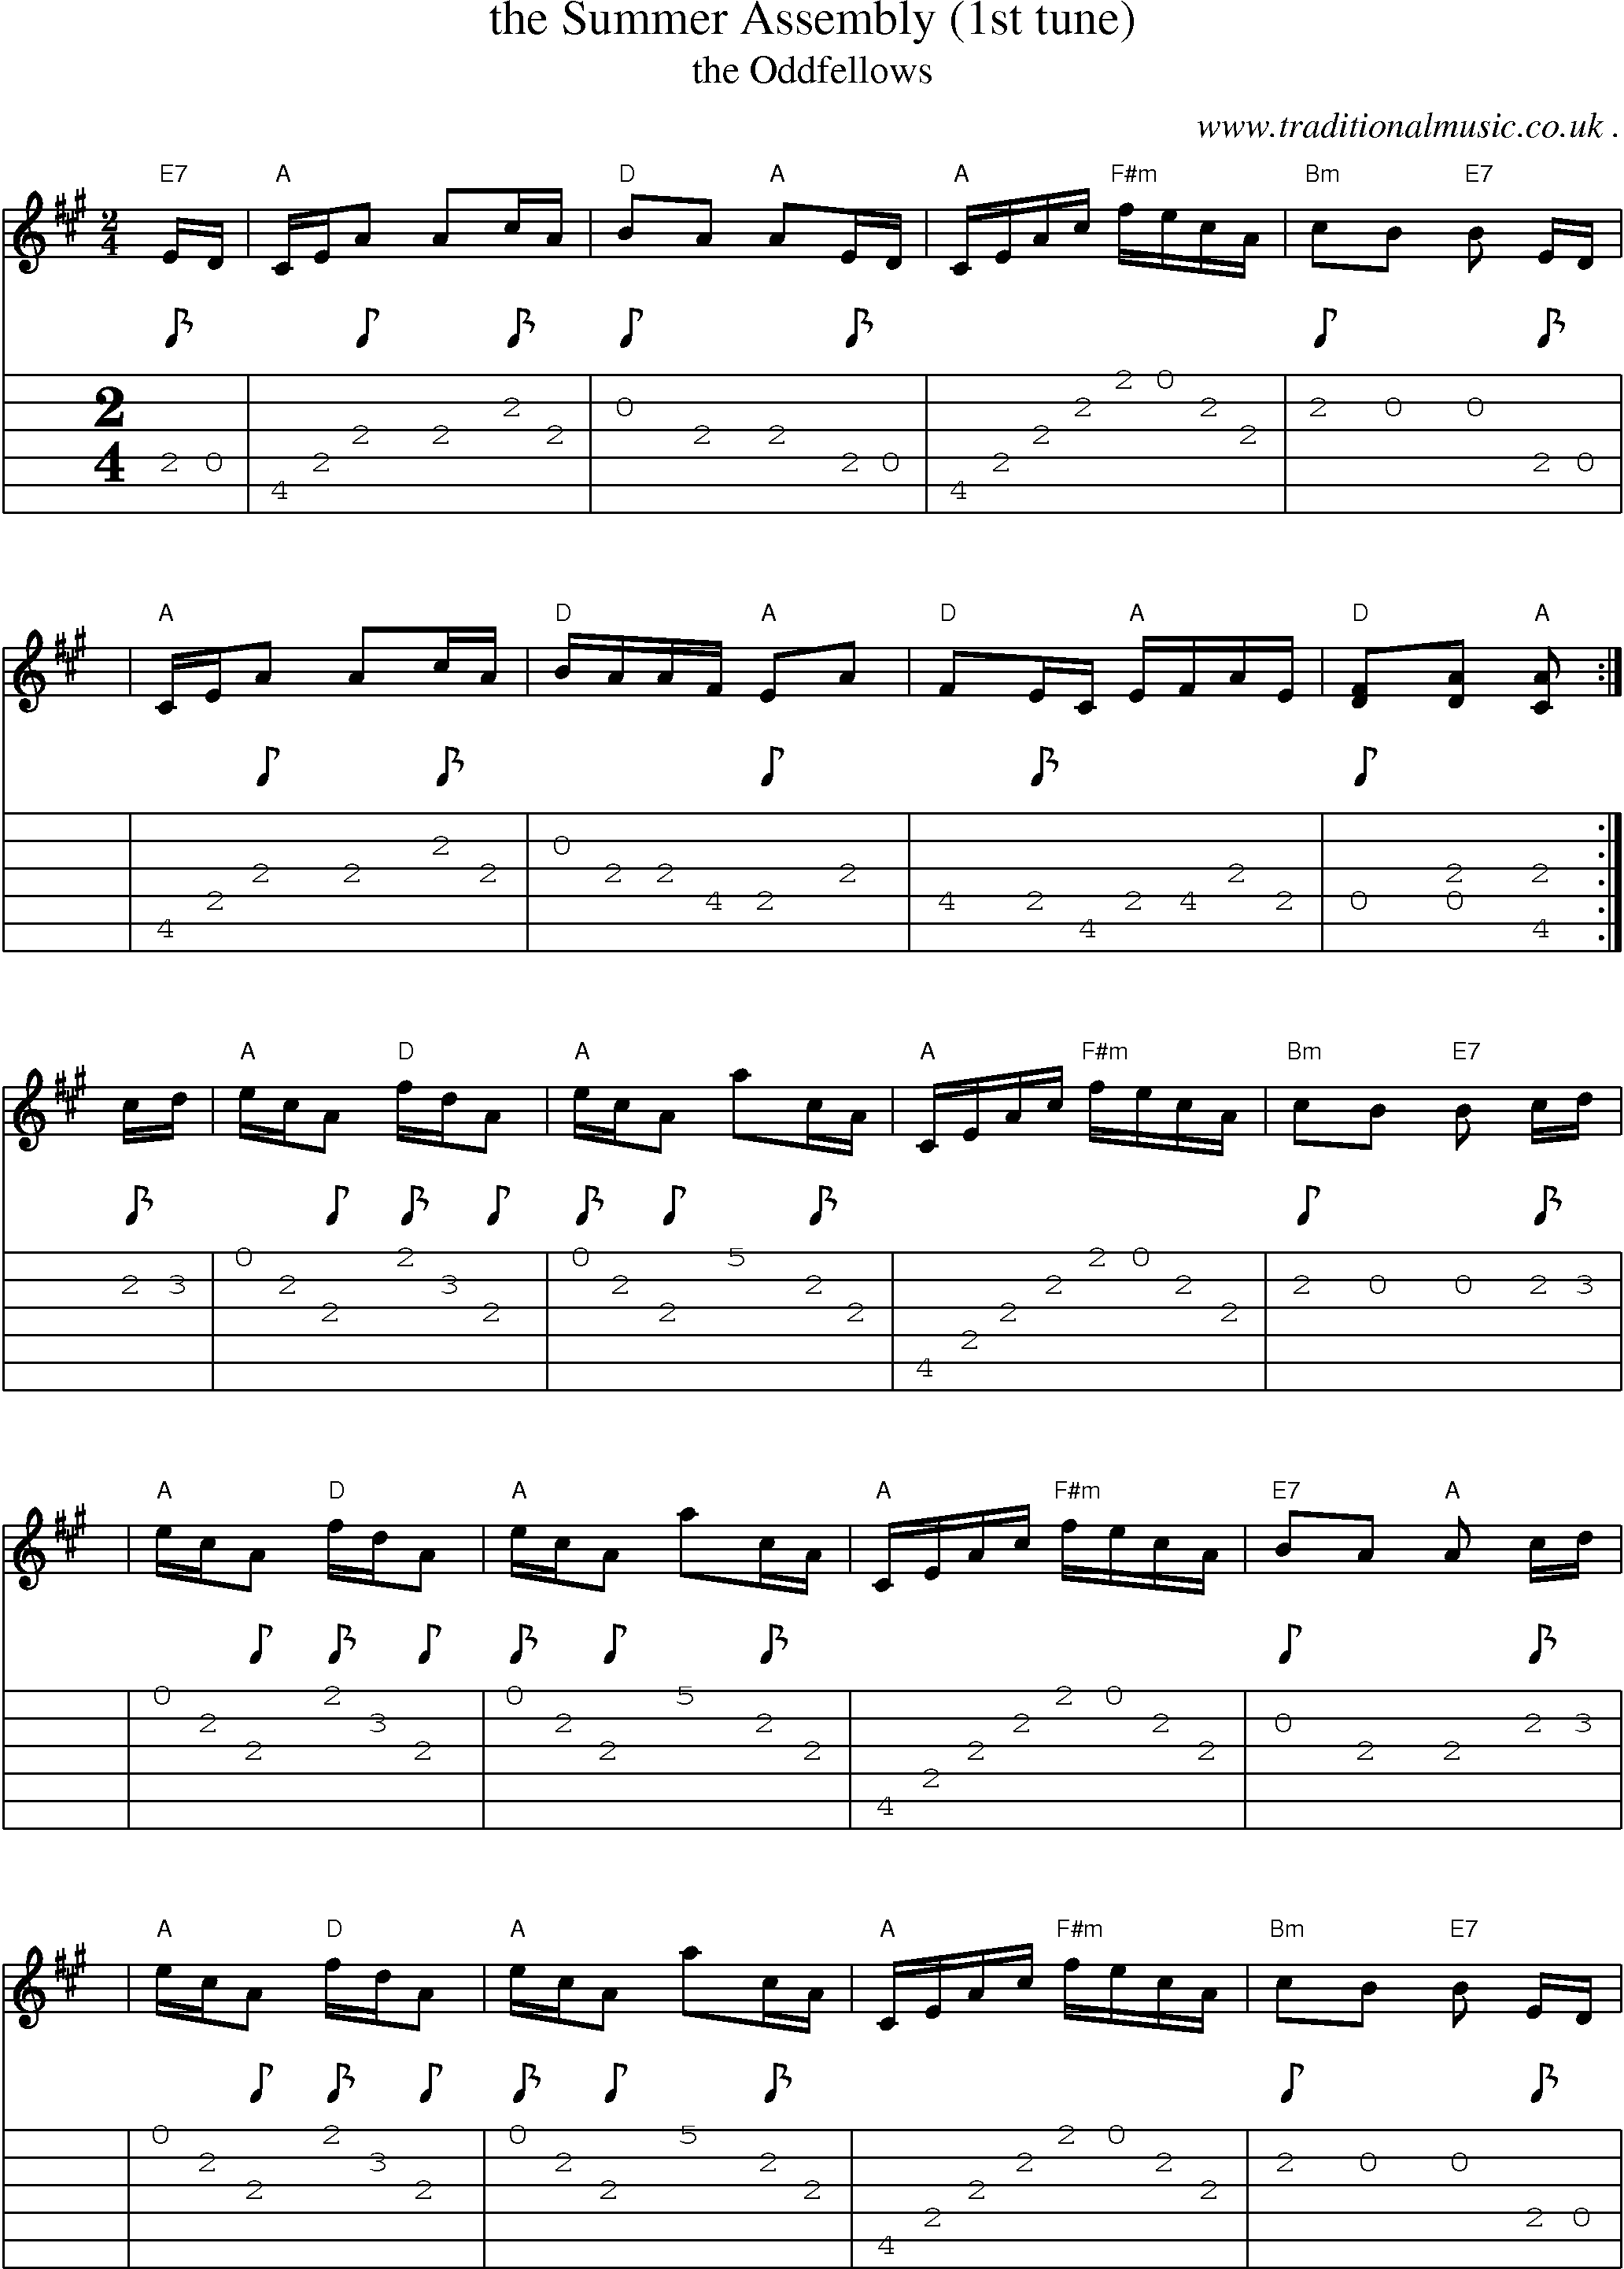 Sheet-music  score, Chords and Guitar Tabs for The Summer Assembly 1st Tune